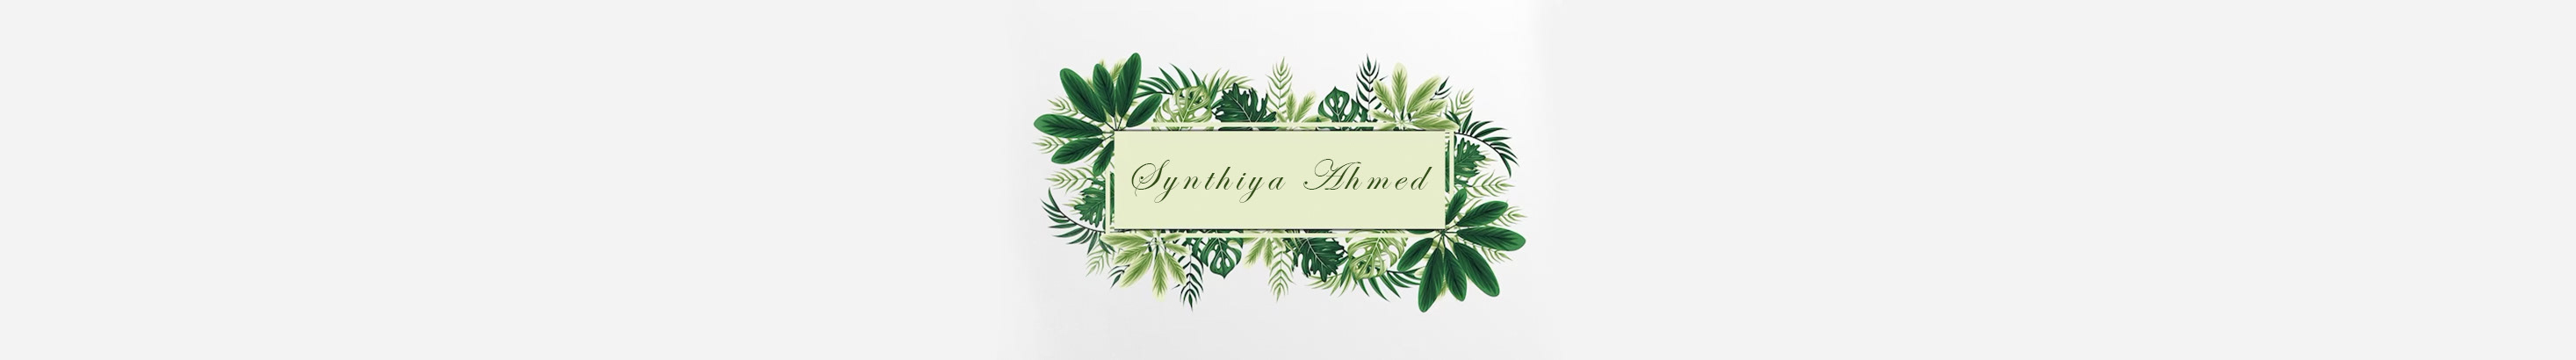 Synthiya Ahmed's profile banner